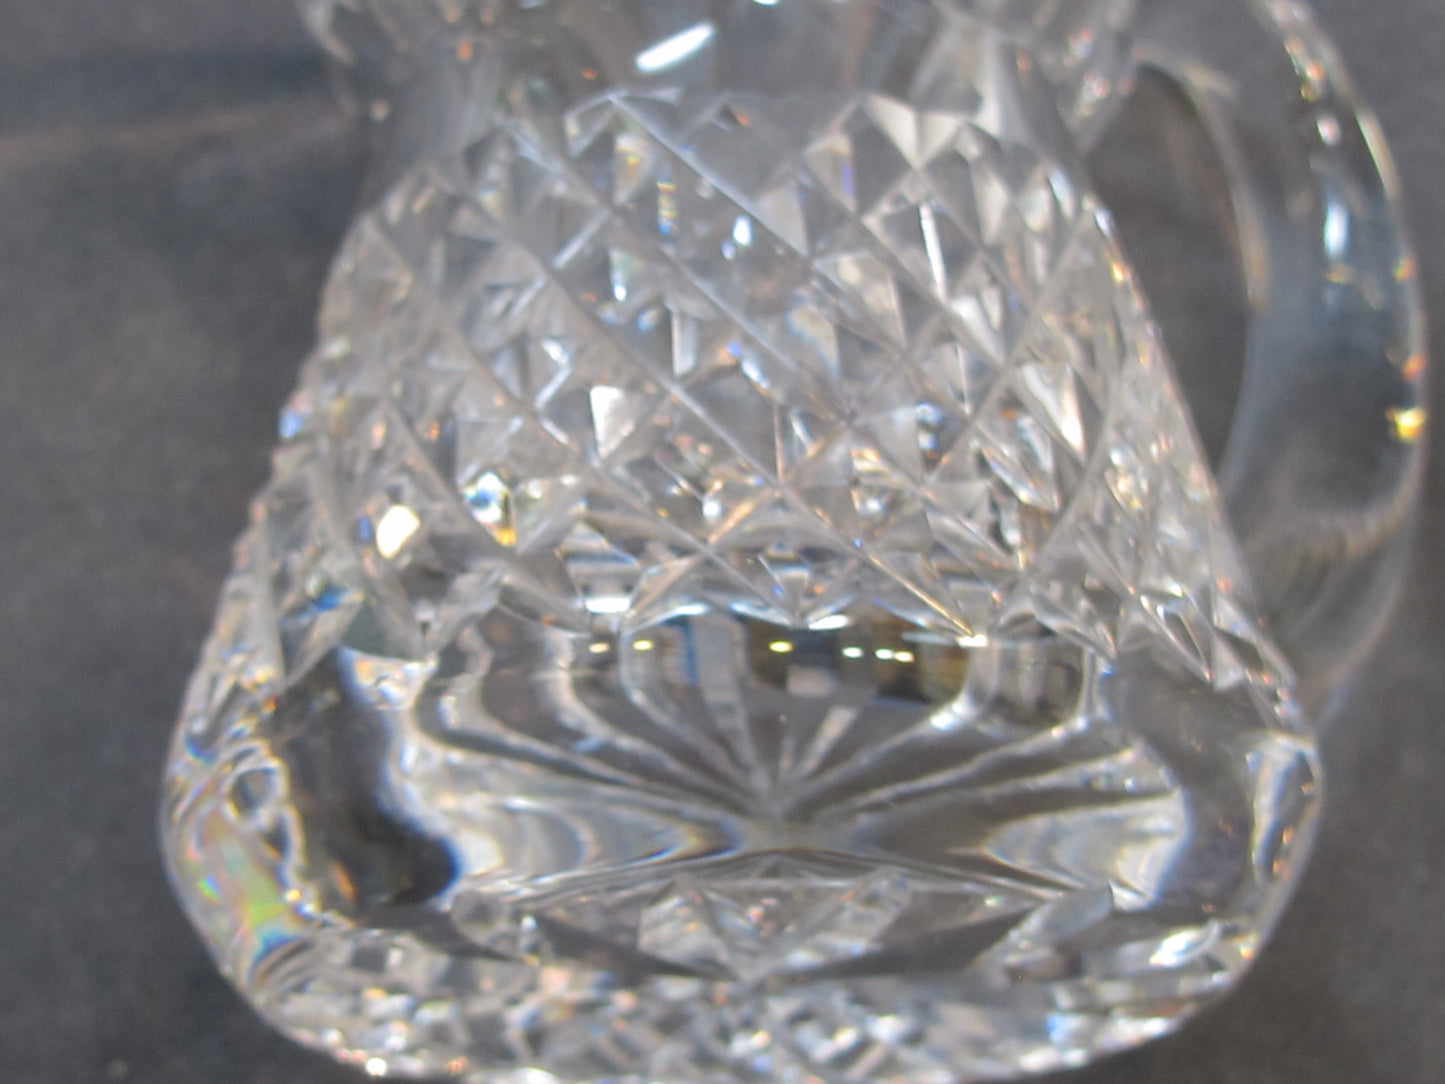 Signed Waterford crystal sugar and creamer